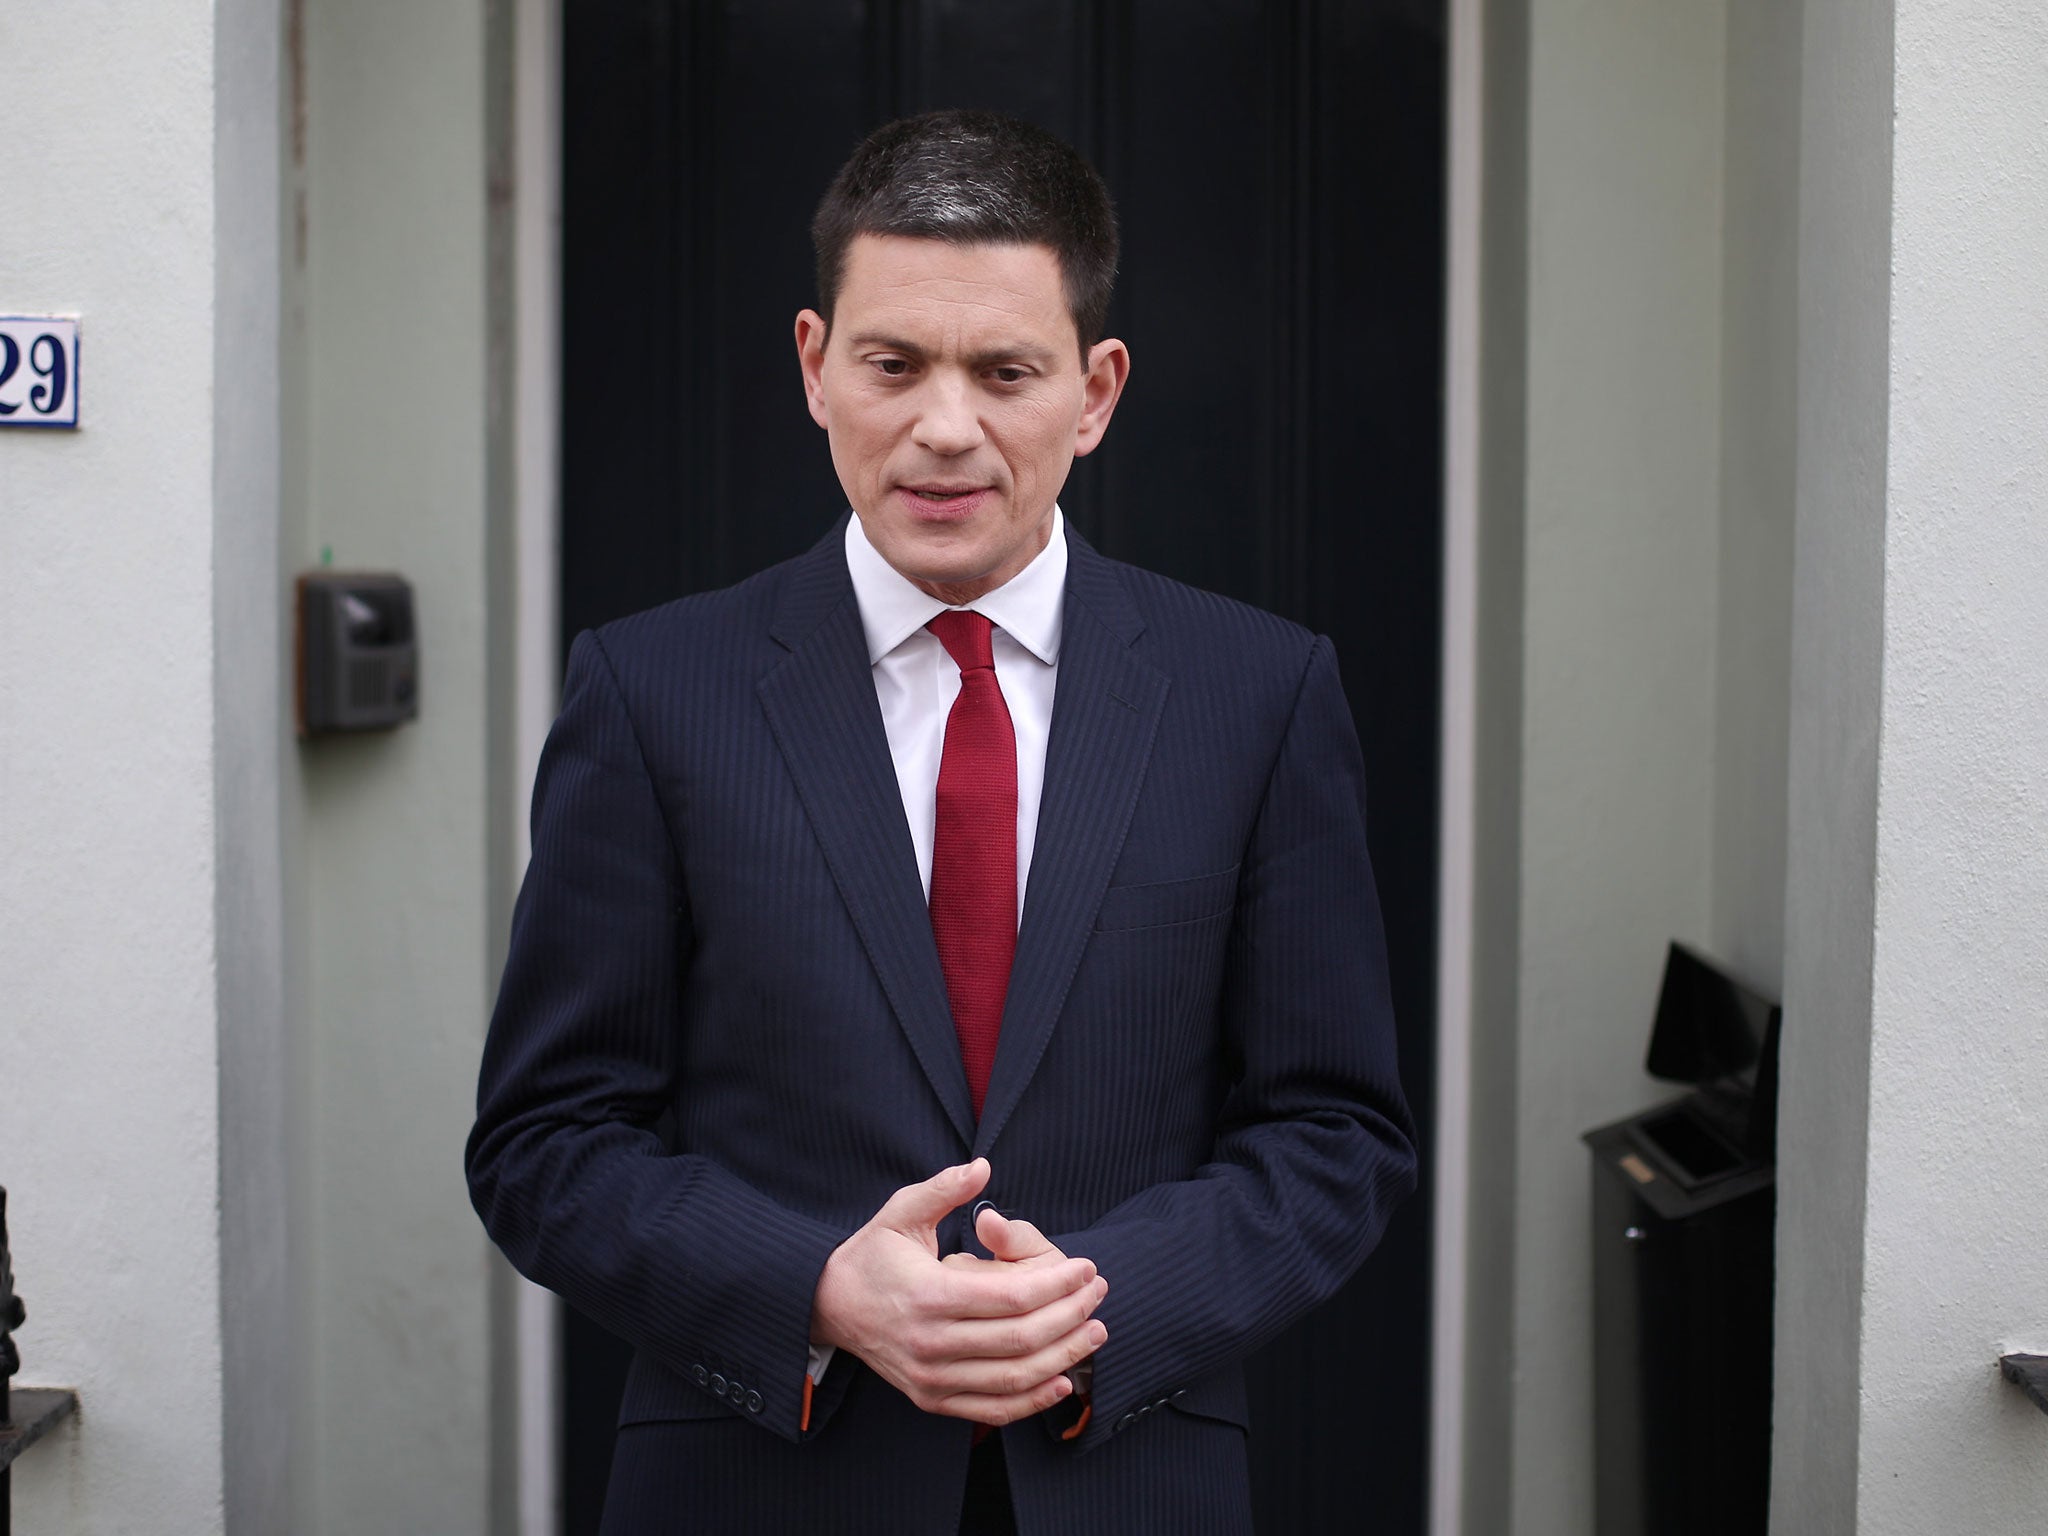 Former Foreign Secretary David Miliband talks to reporters at his home on March 27, 2013 in London, England. Mr Miliband, brother of the opposition Labour Party leader Ed Miliband, has announced that he is to step down as a Member of Parliament and will move to New York to work for the International Rescue Committee.